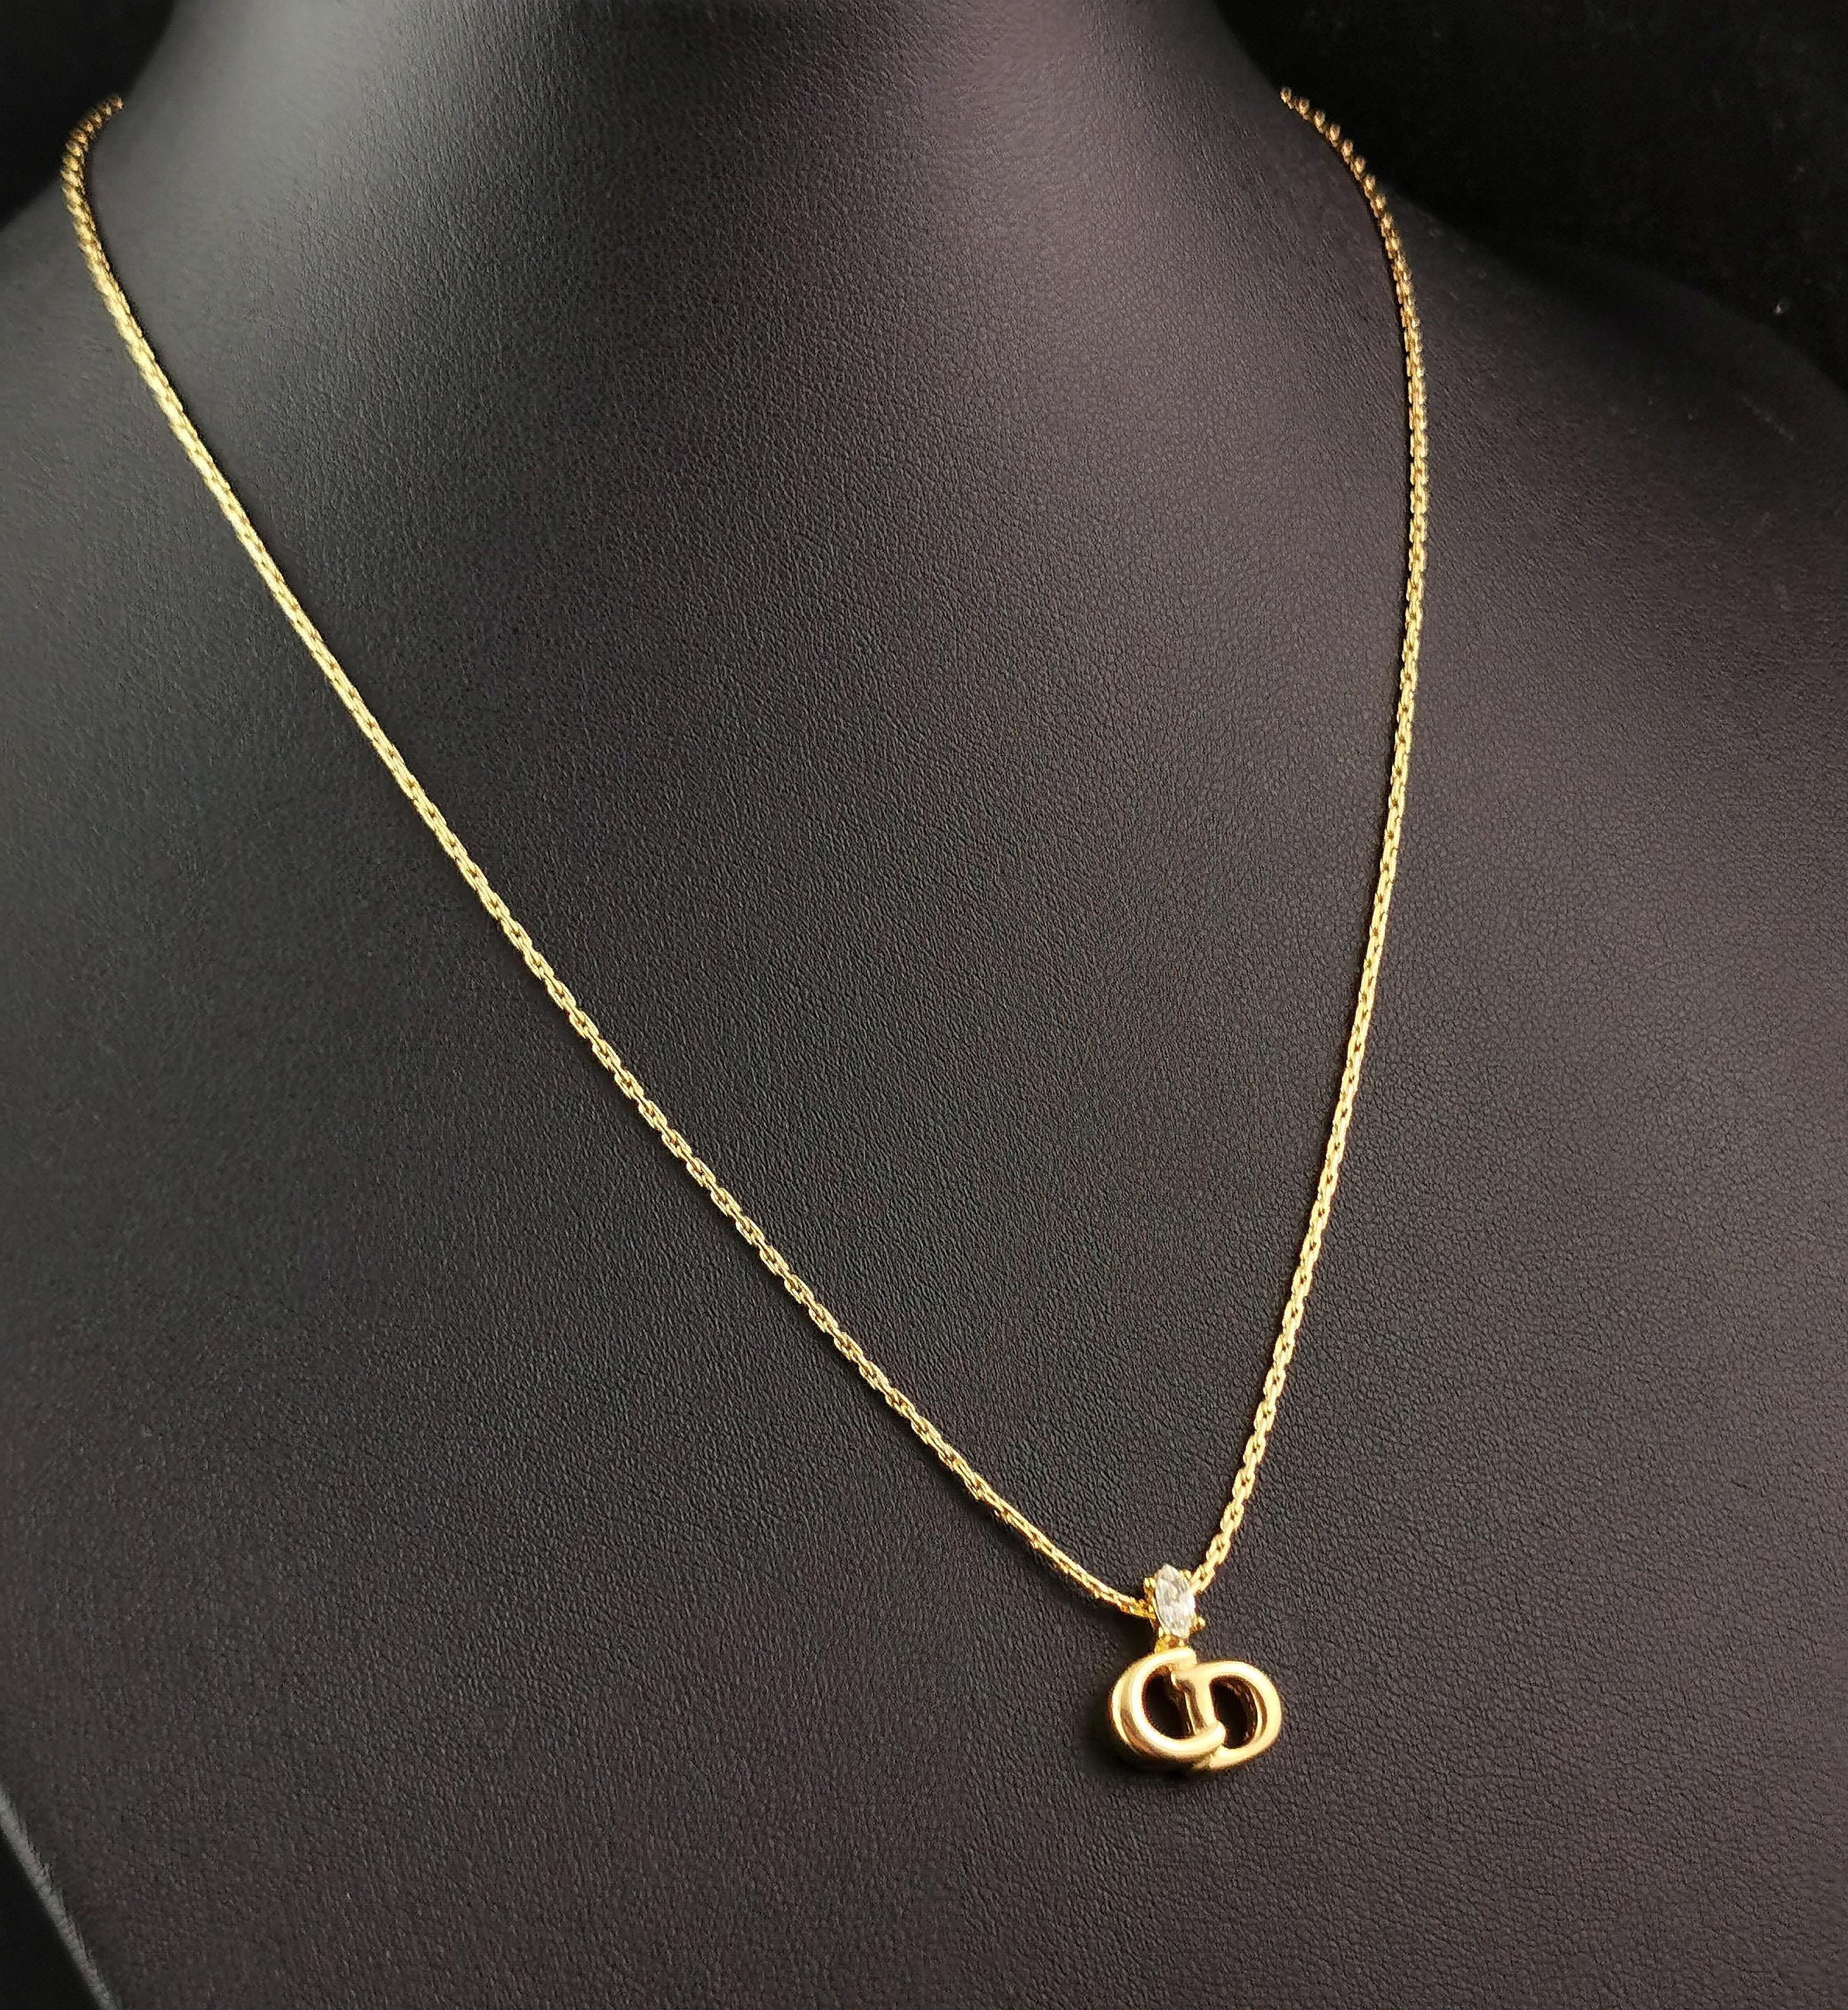 Vintage Christian Dior logo pendant necklace, gold plated, Diamante  For Sale 5